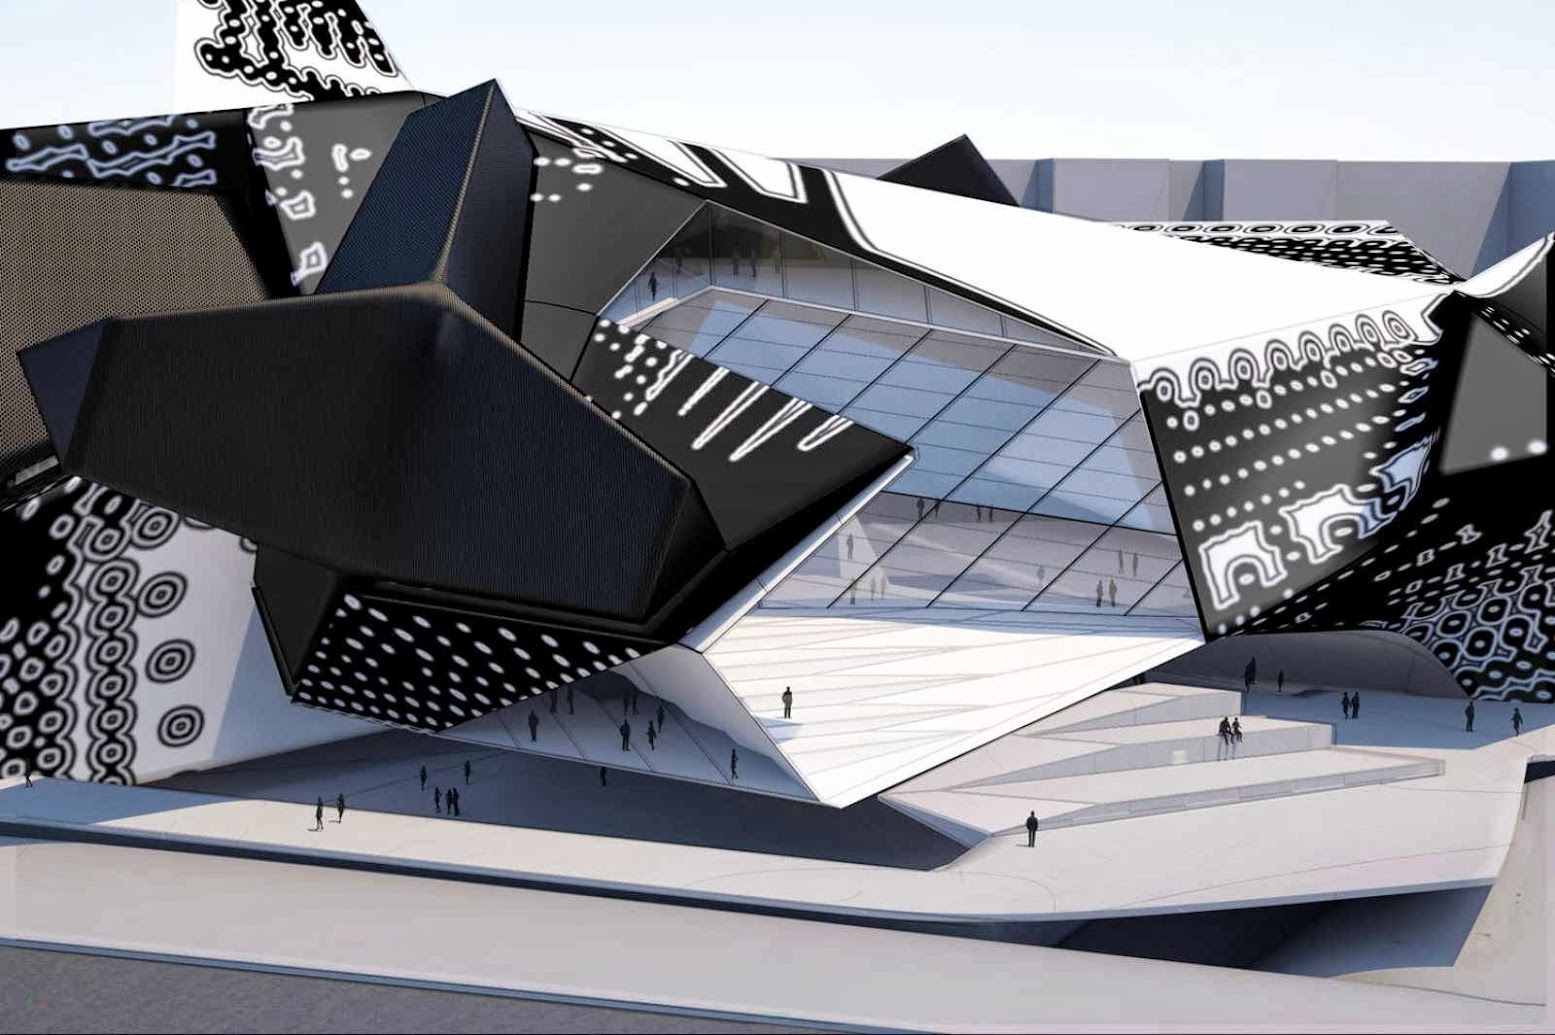 Mosca, Russia: [NATIONAL CENTER FOR CONTEMPORARY ARTS BY TOM WISCOMBE DESIGN]